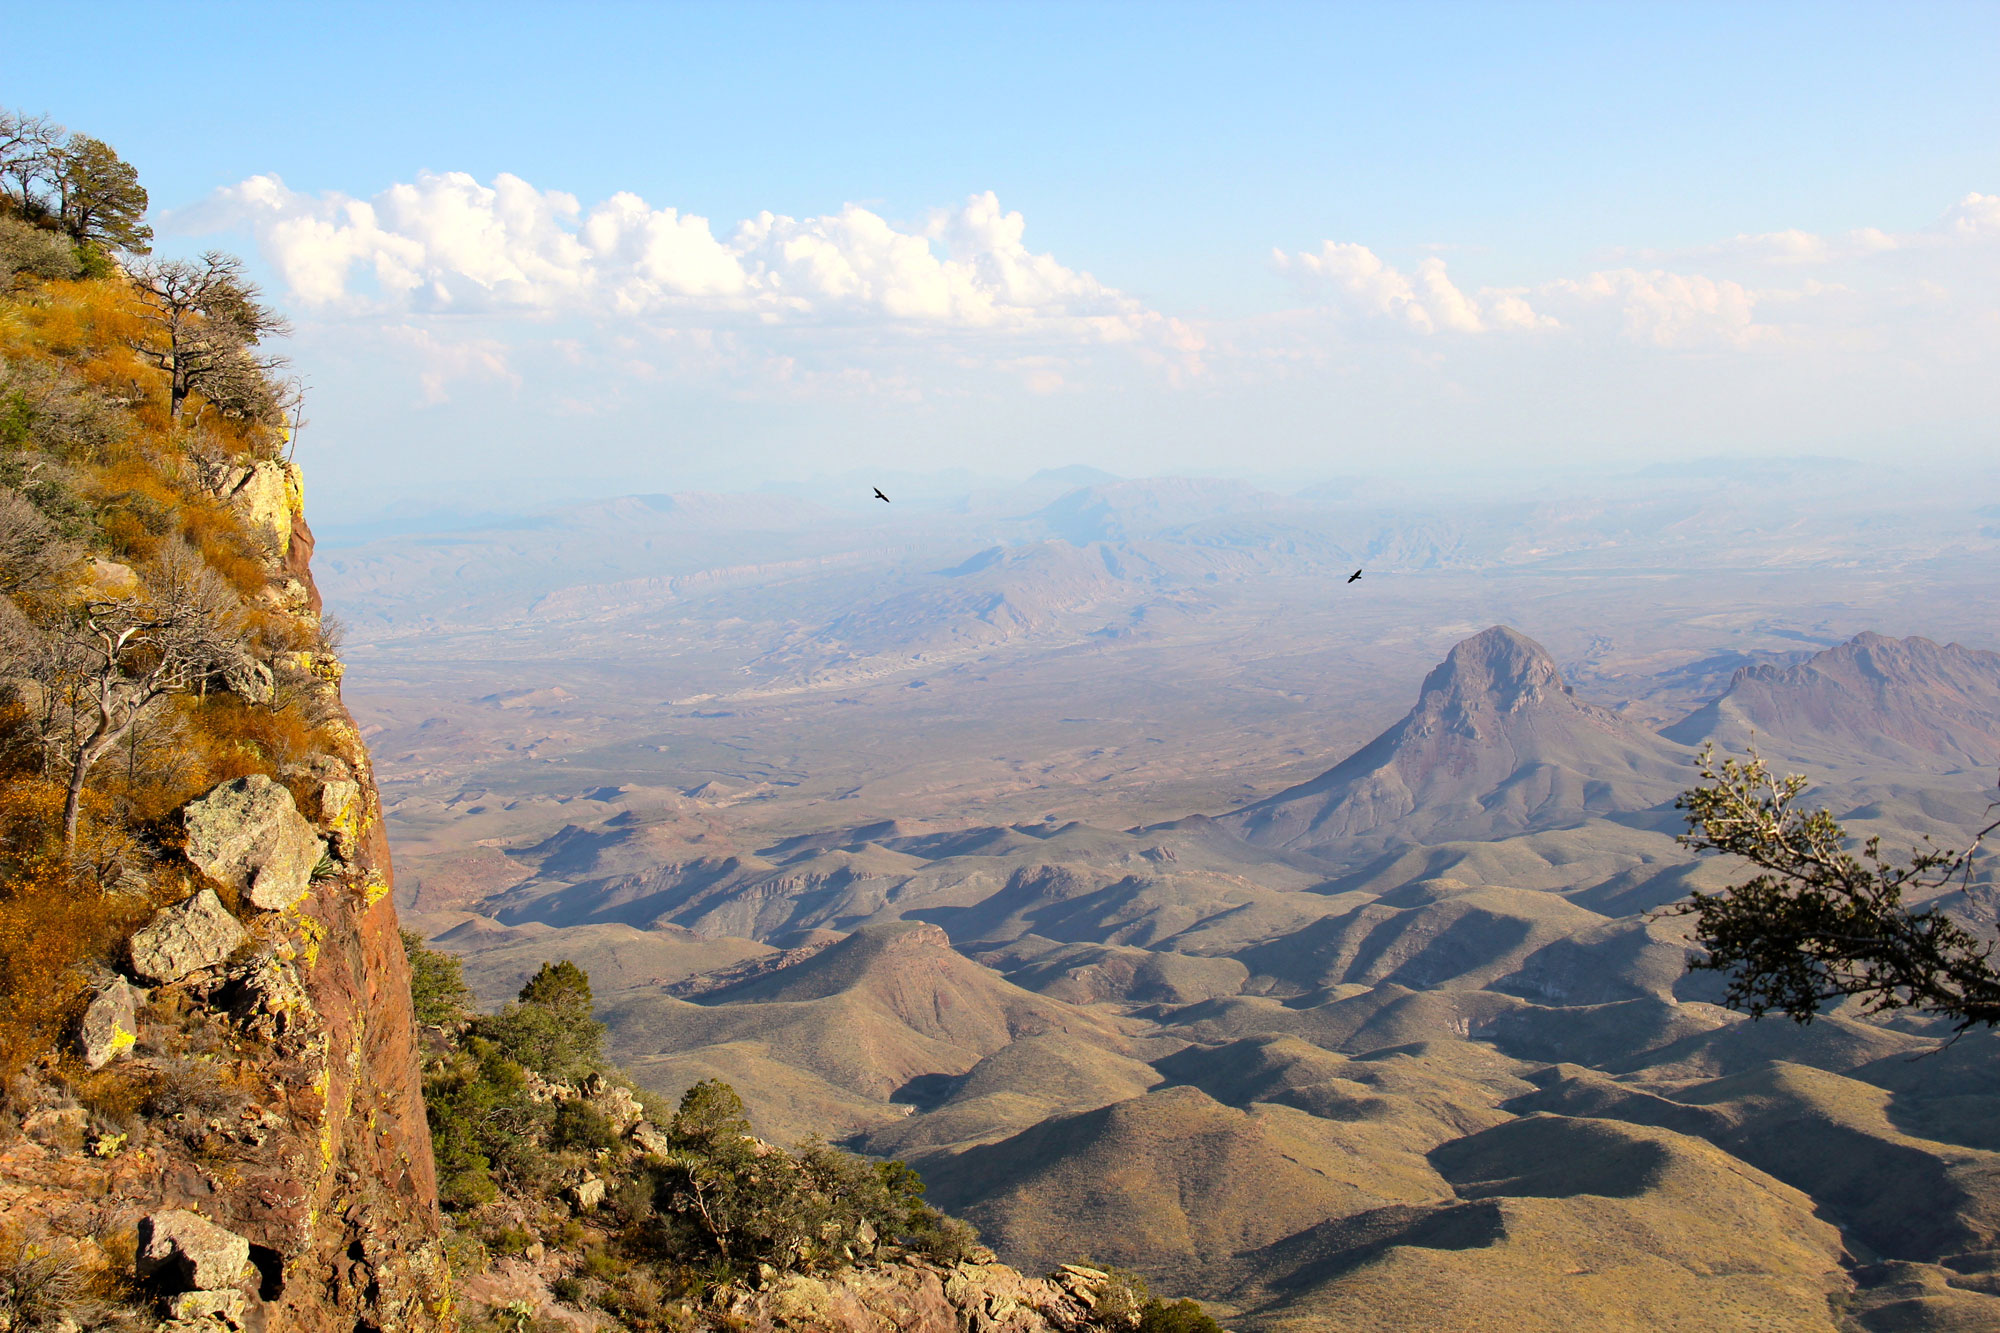 Photograph of the Chihuahuan desert in Texas as viewed from the Chisos Mountains. The landscape has hills and a prominent peak, all of which appear to have the scrubby vegetation of a semi-arid to arid environment.